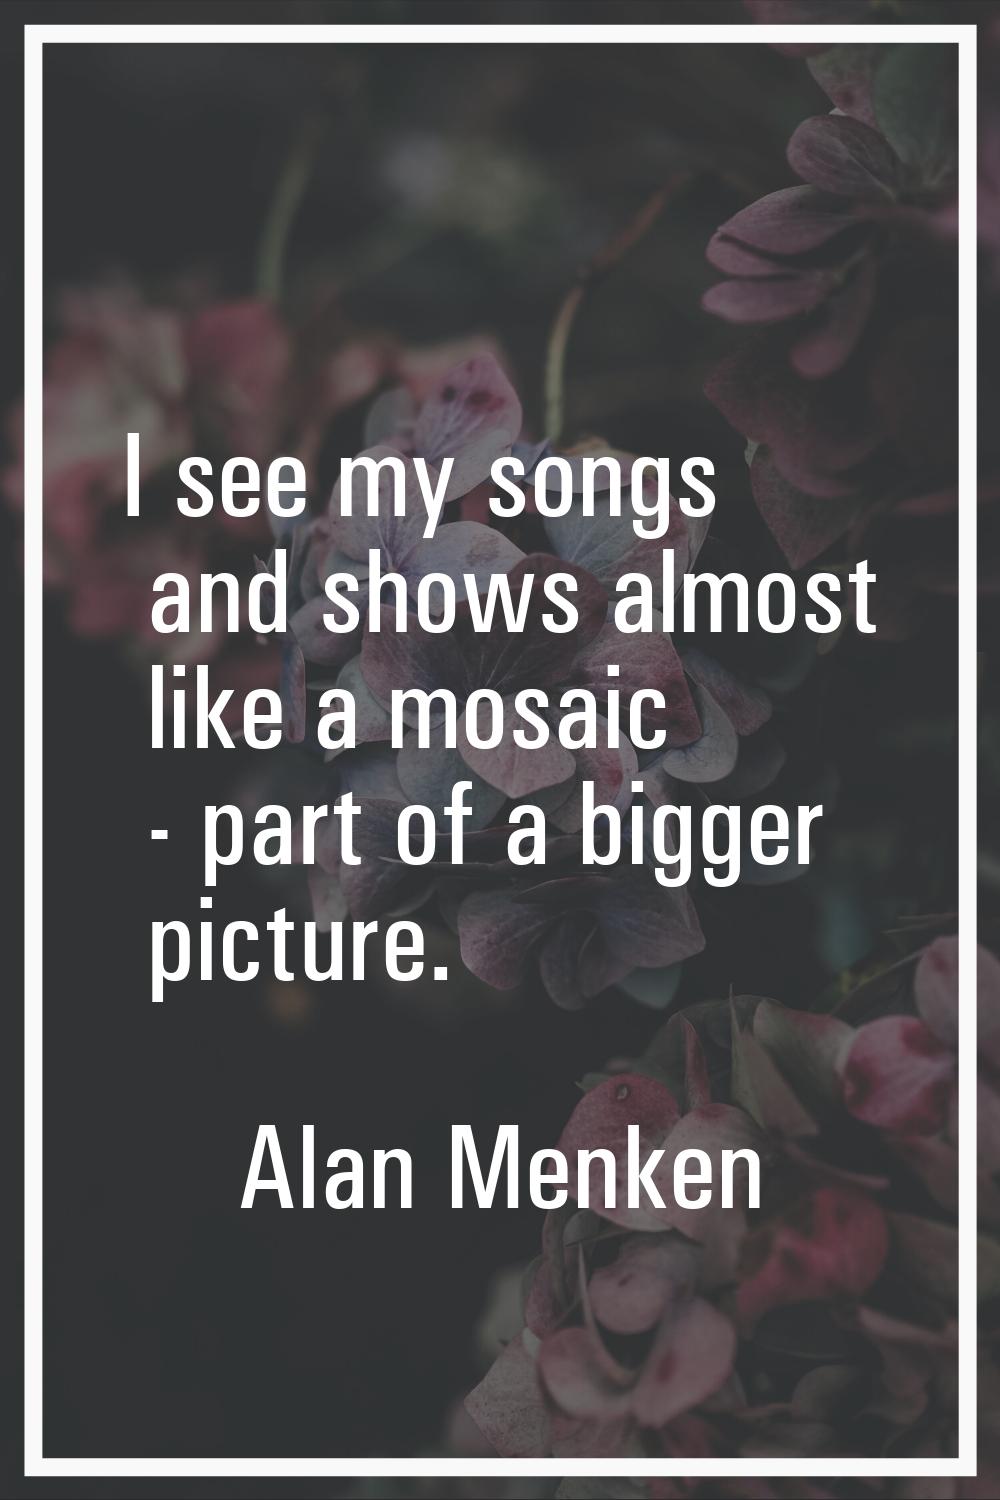 I see my songs and shows almost like a mosaic - part of a bigger picture.